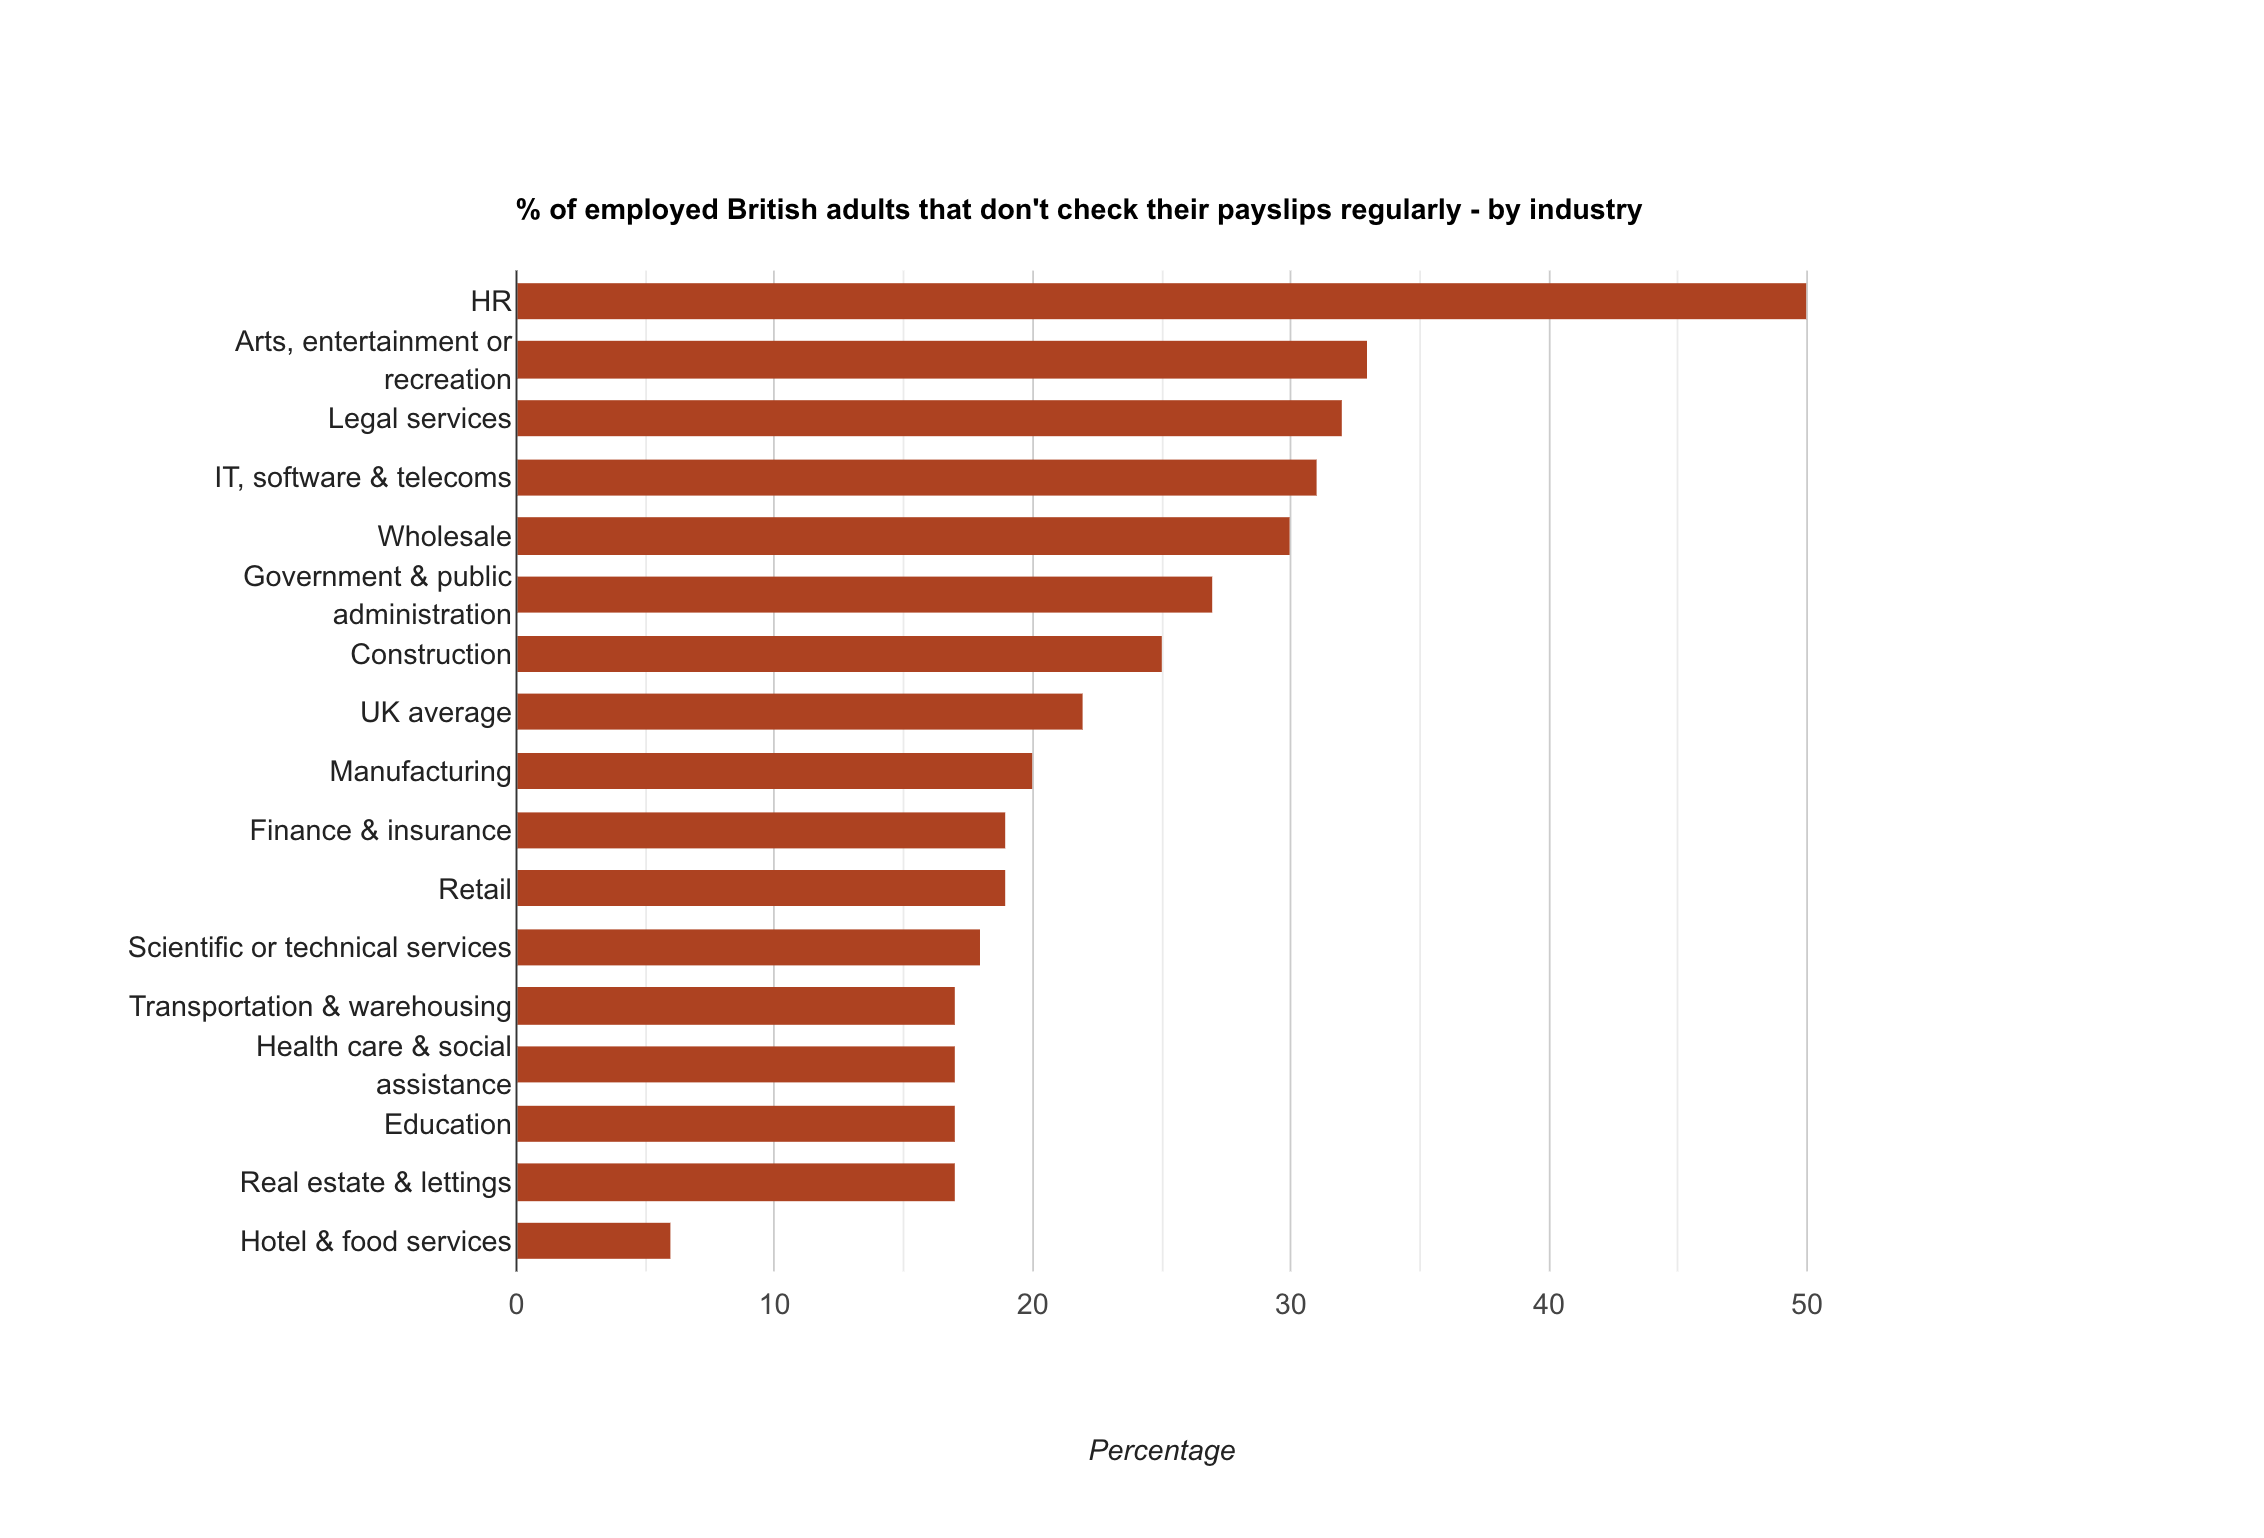 People least likely to check their payslips - by industry